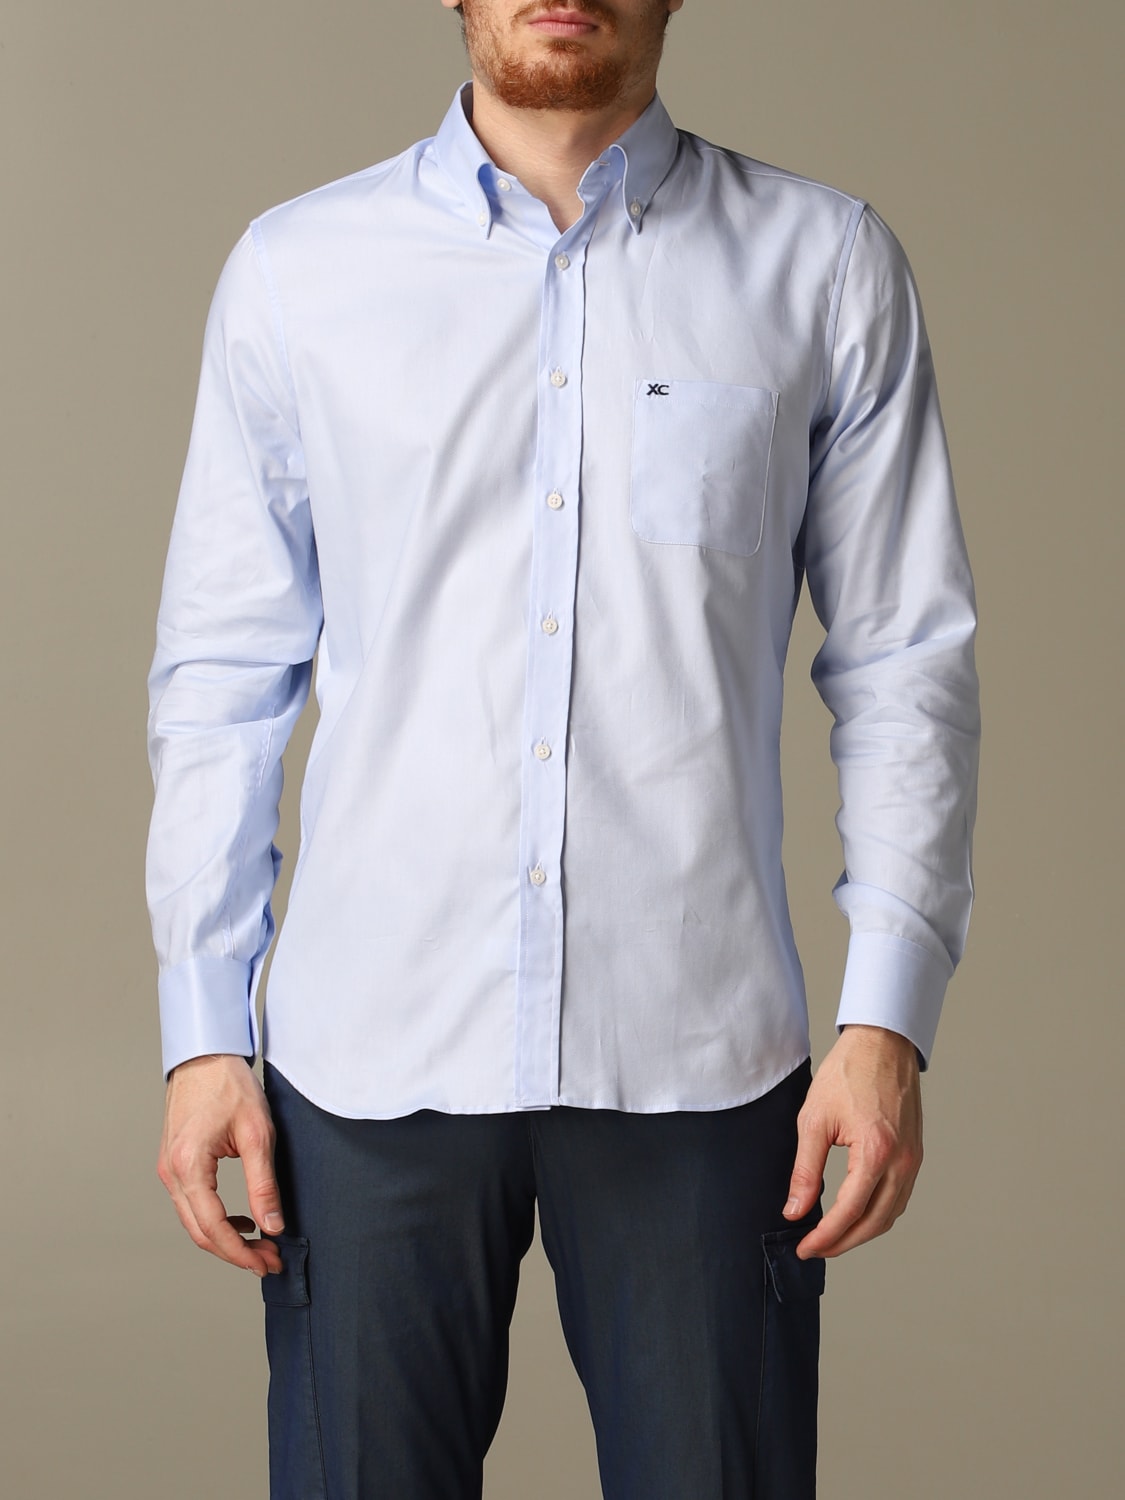 Xc -  regular fit shirt with button-down collar